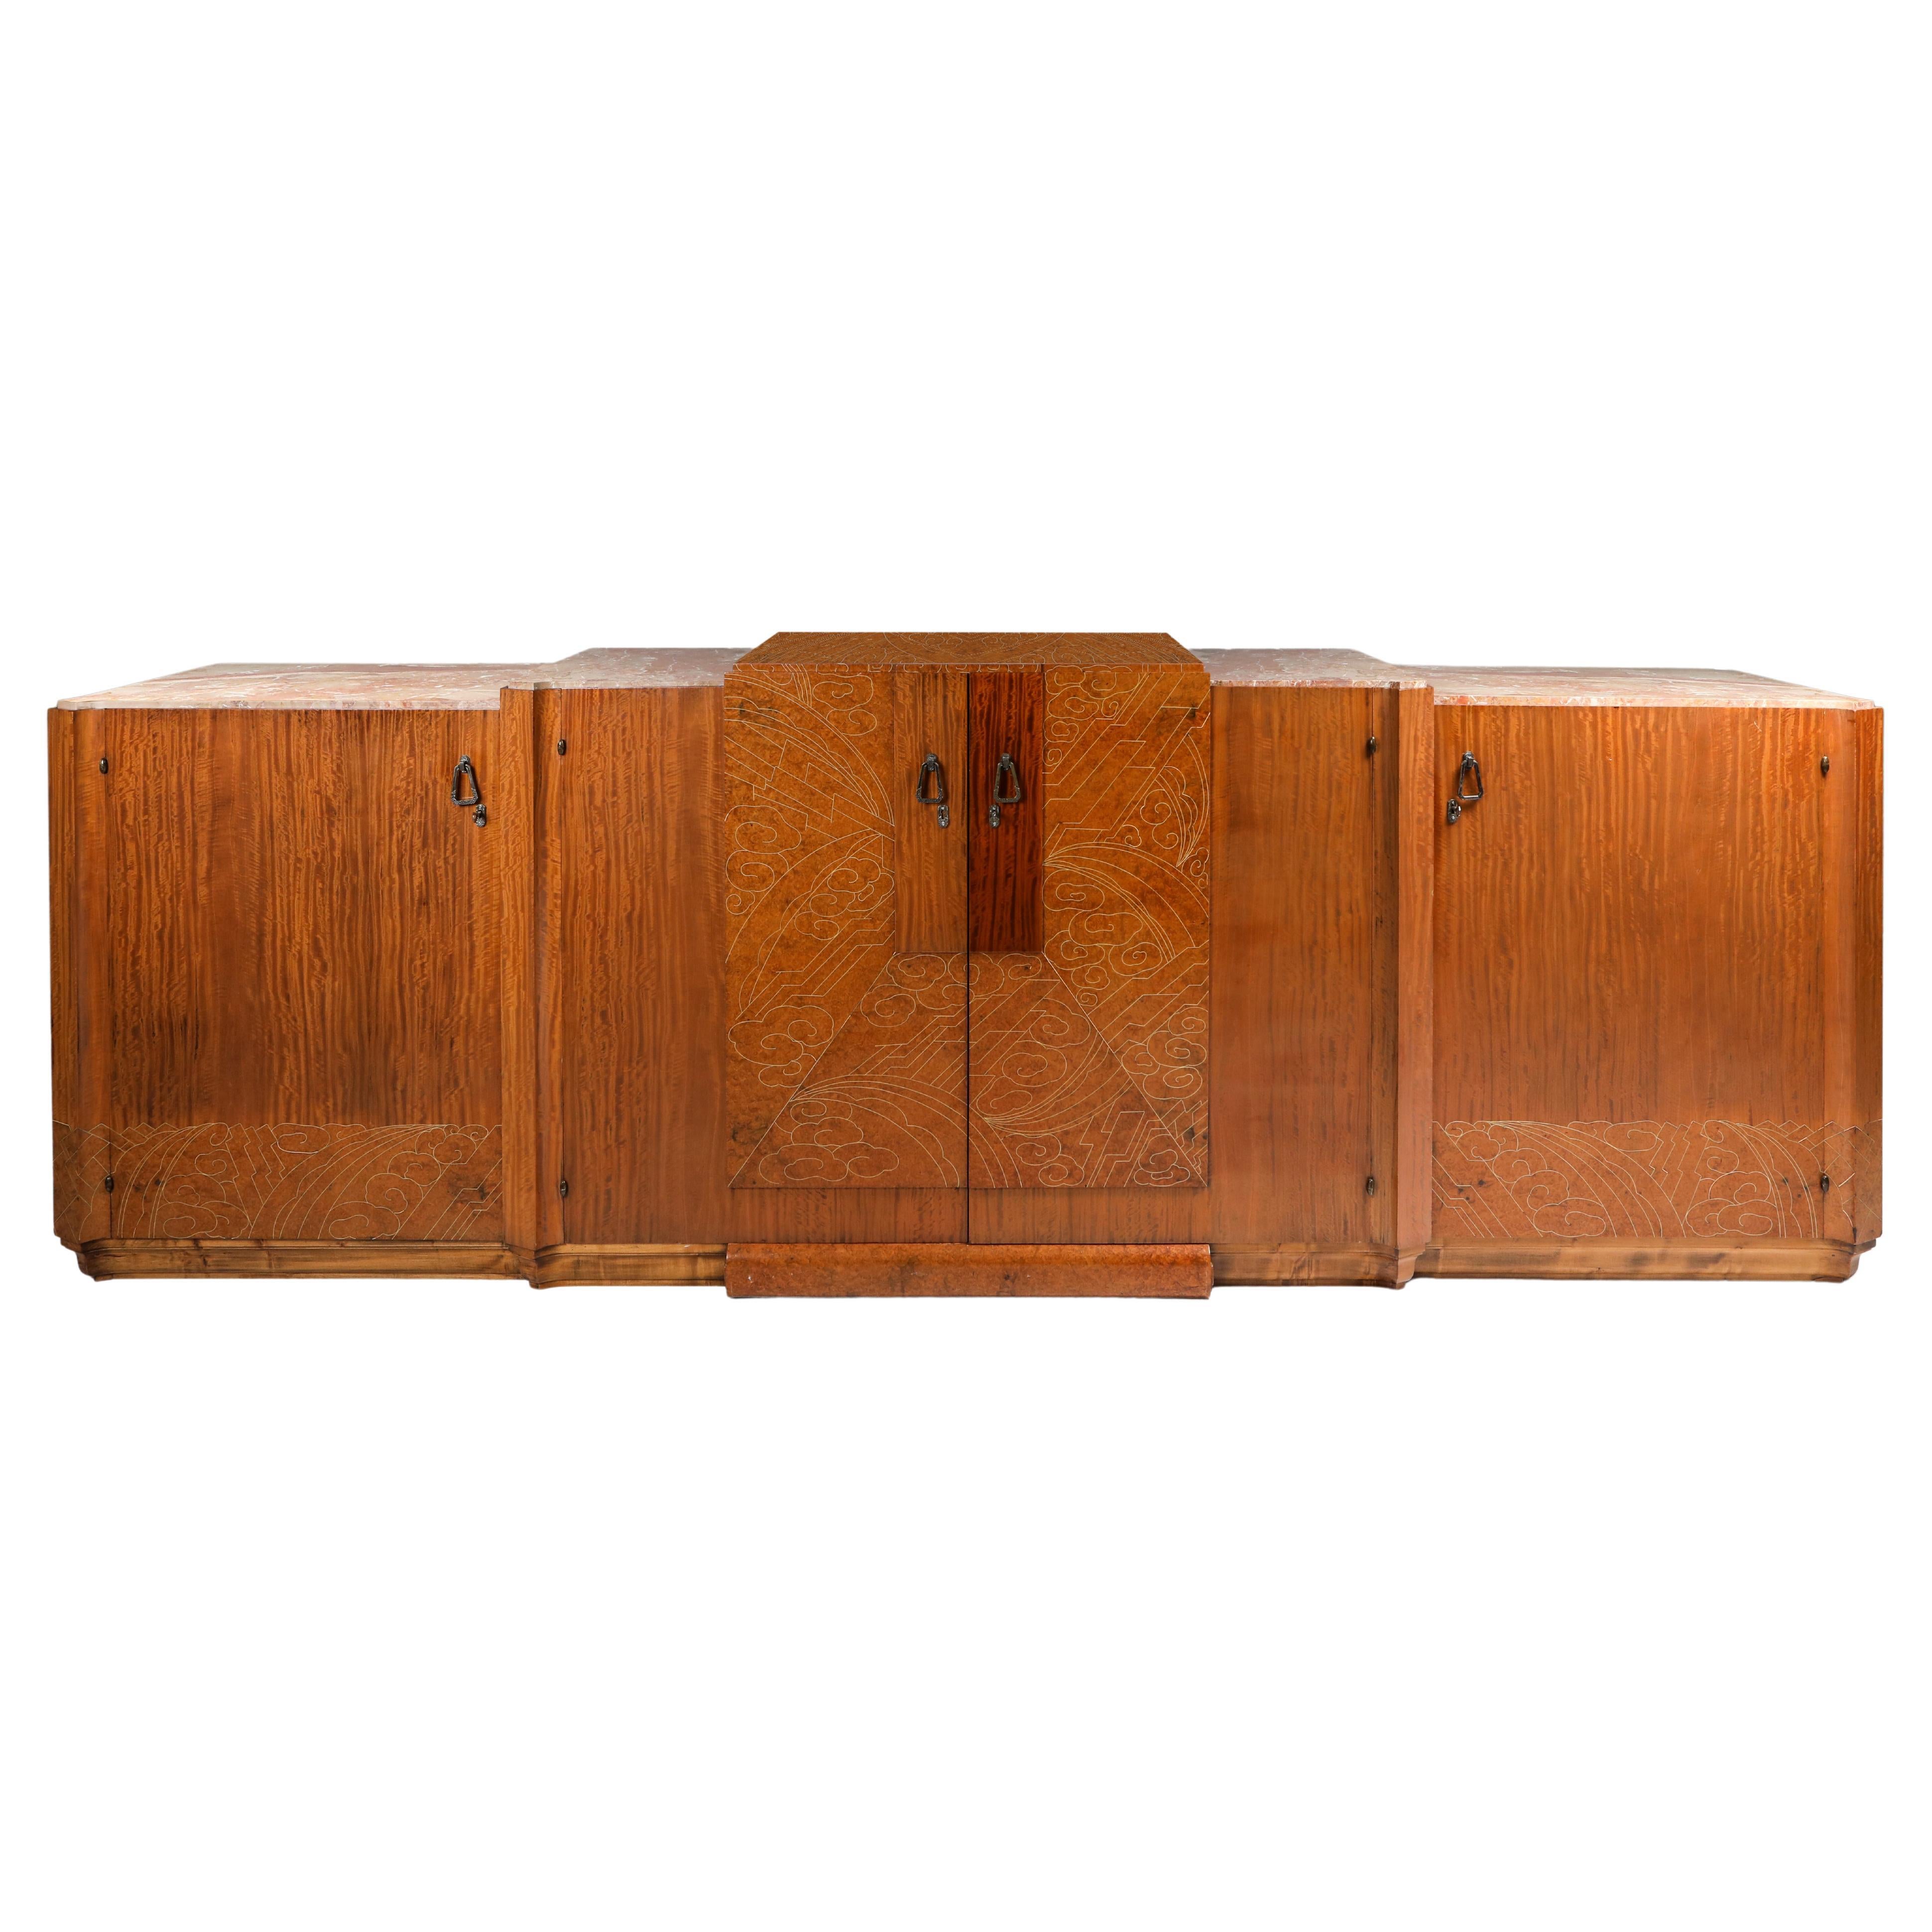 Art Deco High-End Credenza, Mahogany, Burl, Loupe D'amboine and Marble, 1930's